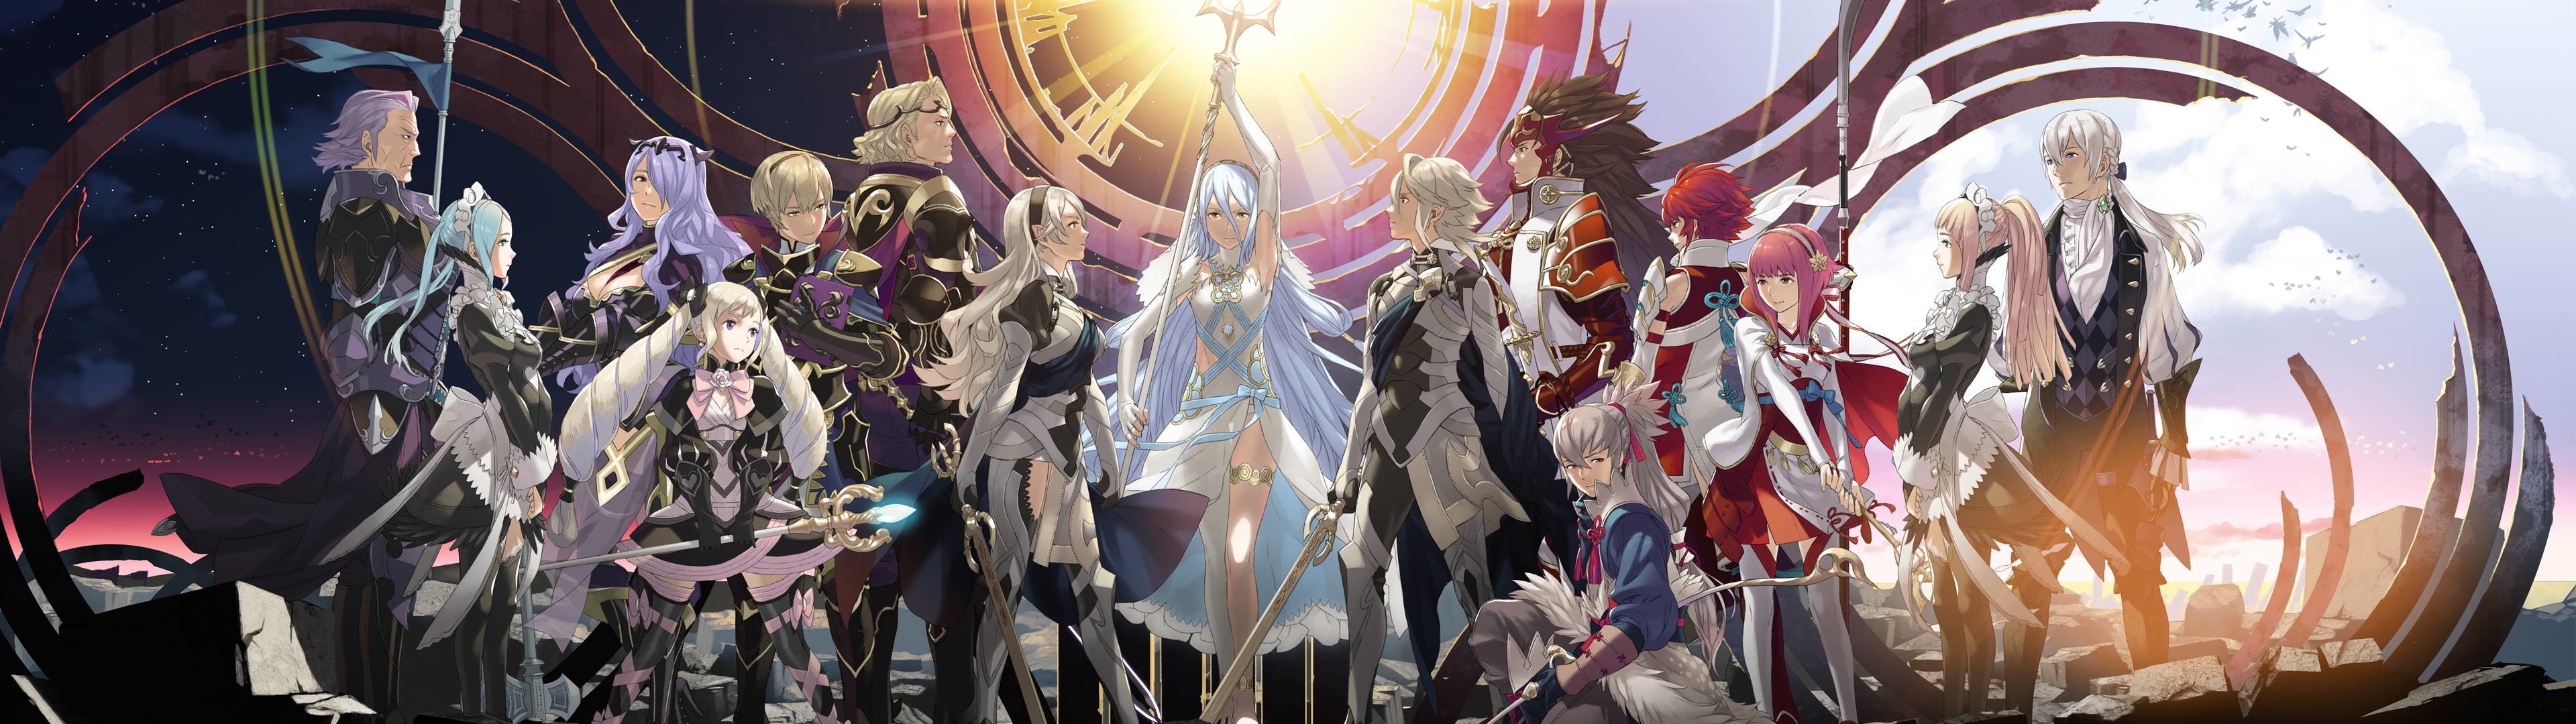 3840x1080 Wanted to share the dual monitor Fates wallpaper I made with all .